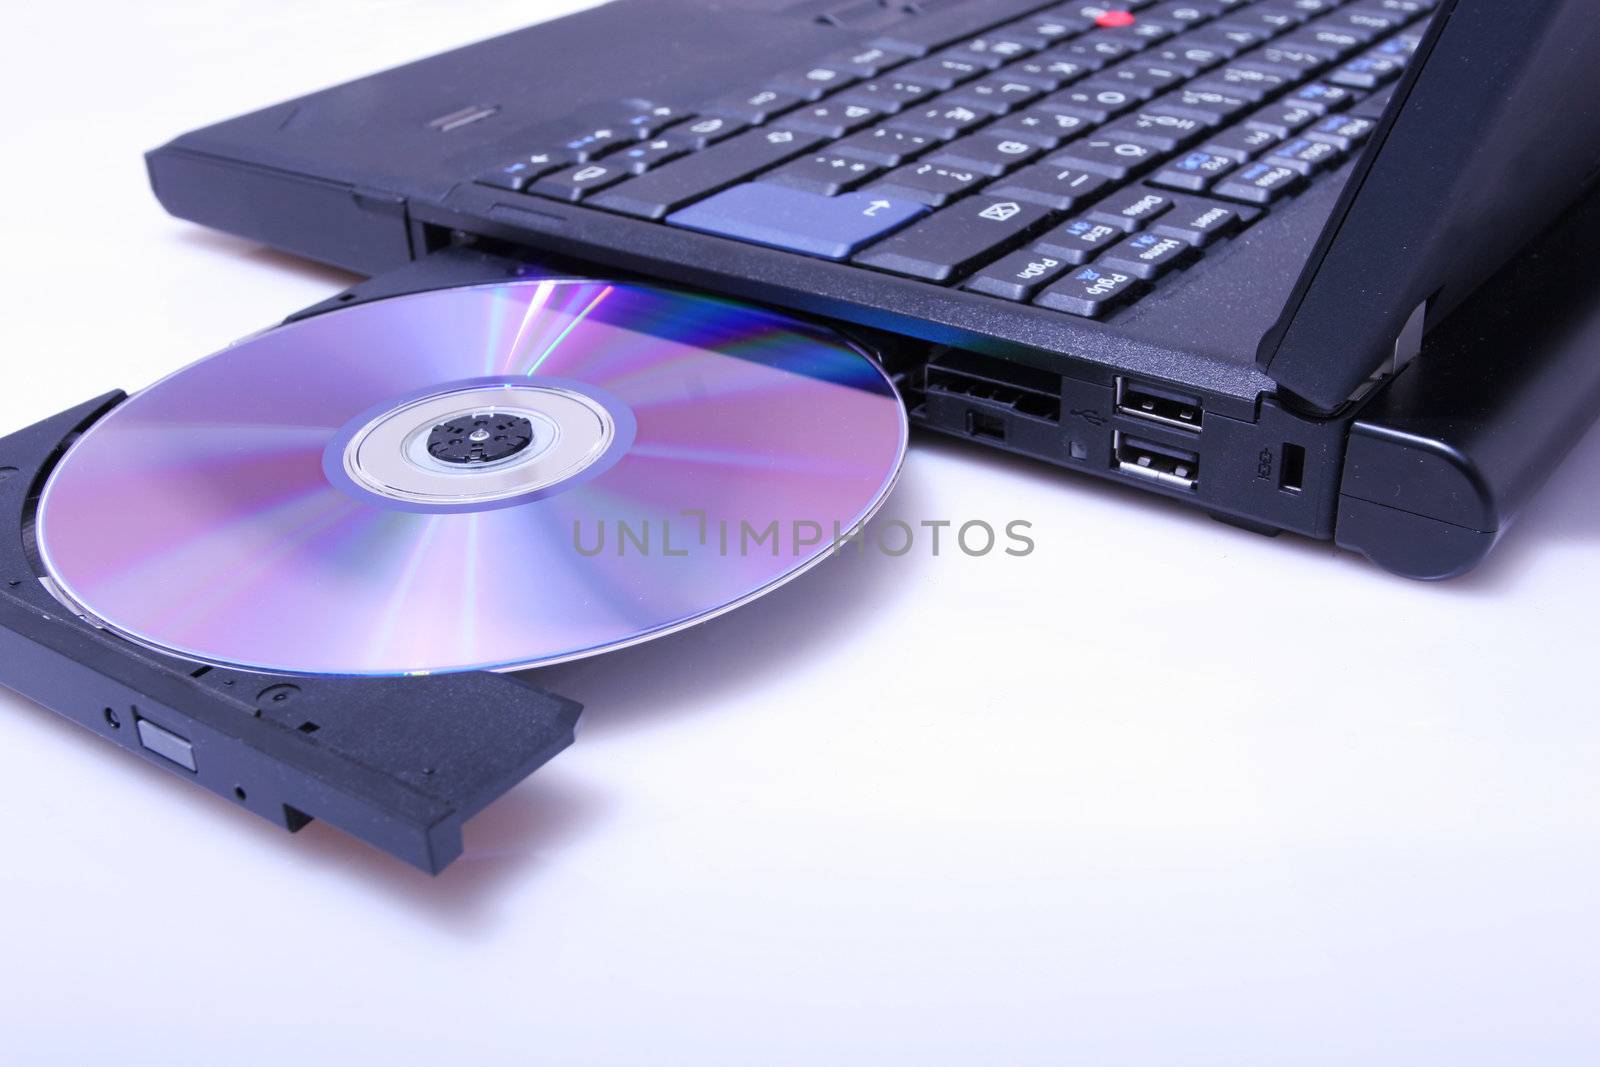 brand new laptop with cd in open cd drive, shot on white